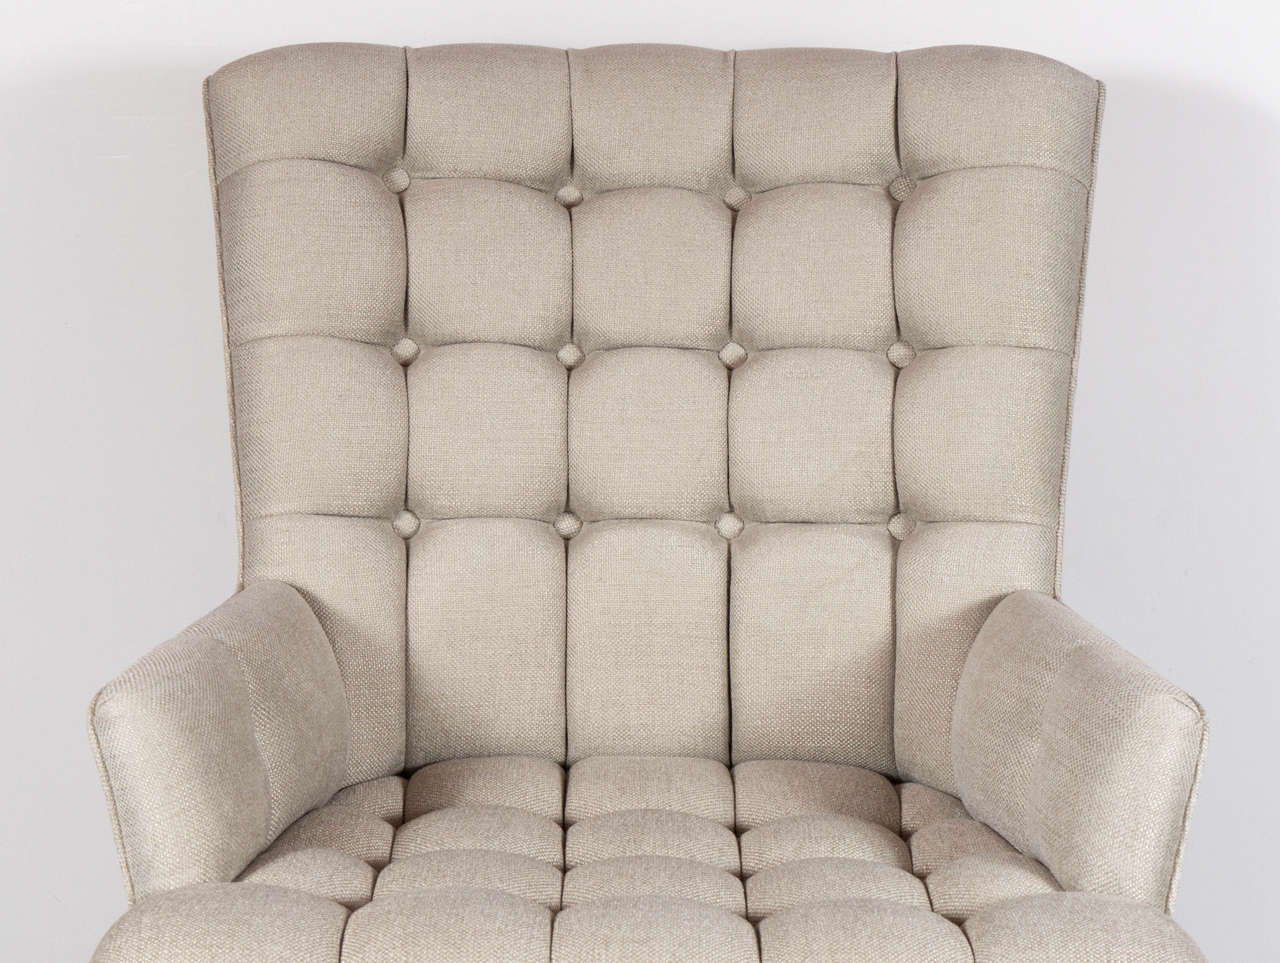 American Mid-Century Modern Biscuit Tufted Armchair in the Manner of William Haines For Sale